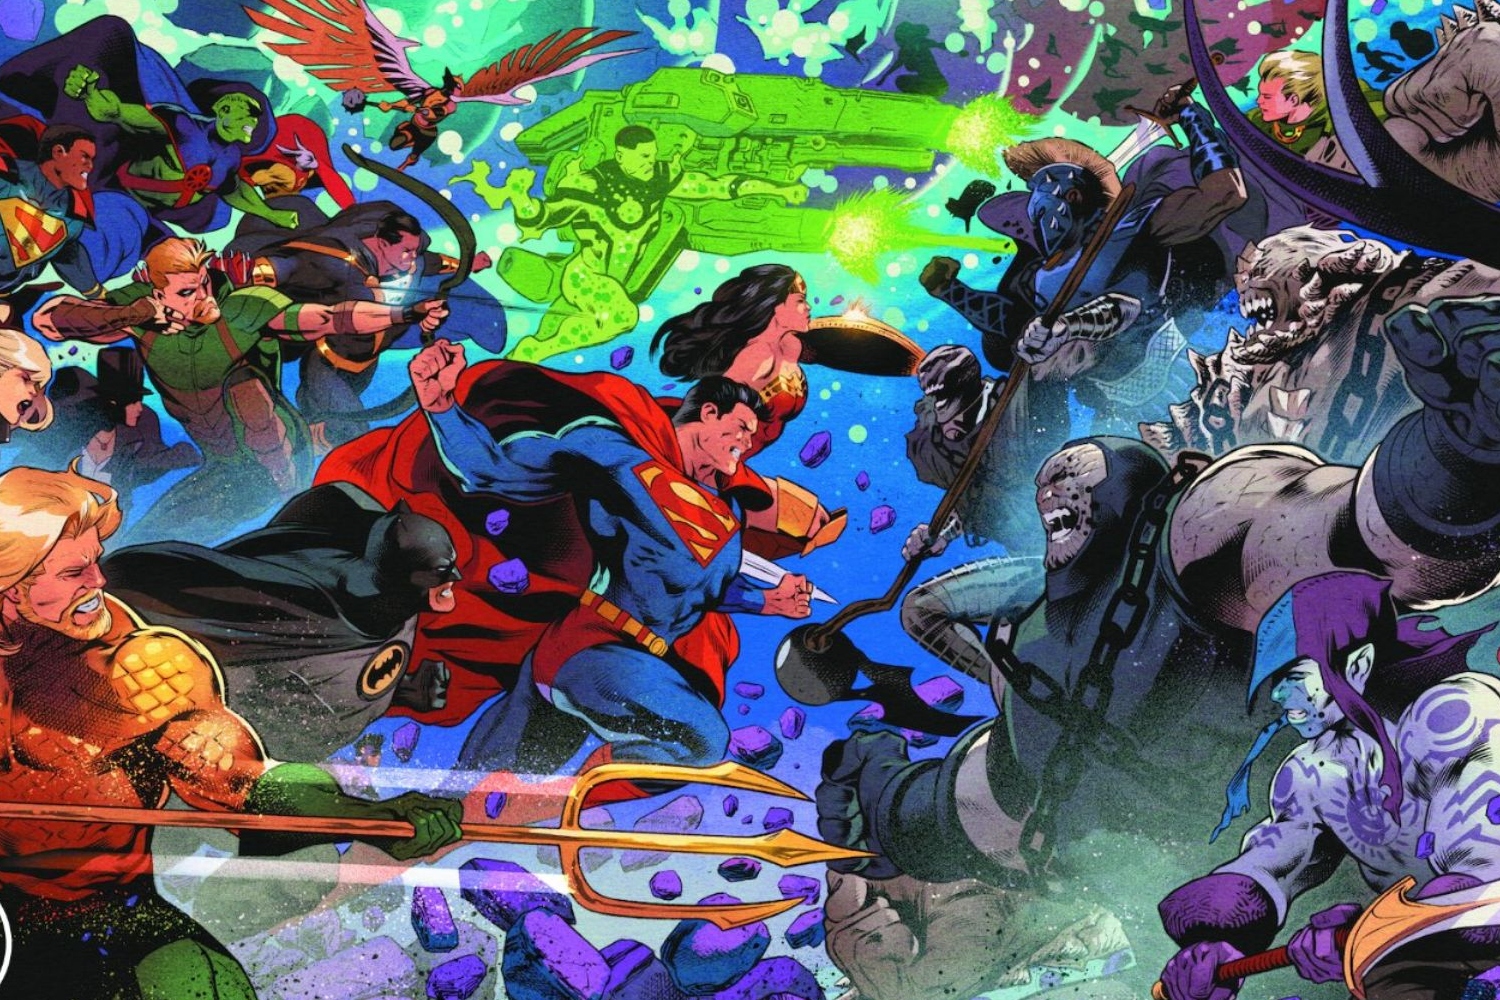 In his own words: Josh Williamson on killing heroes in 'The Death of the Justice League'